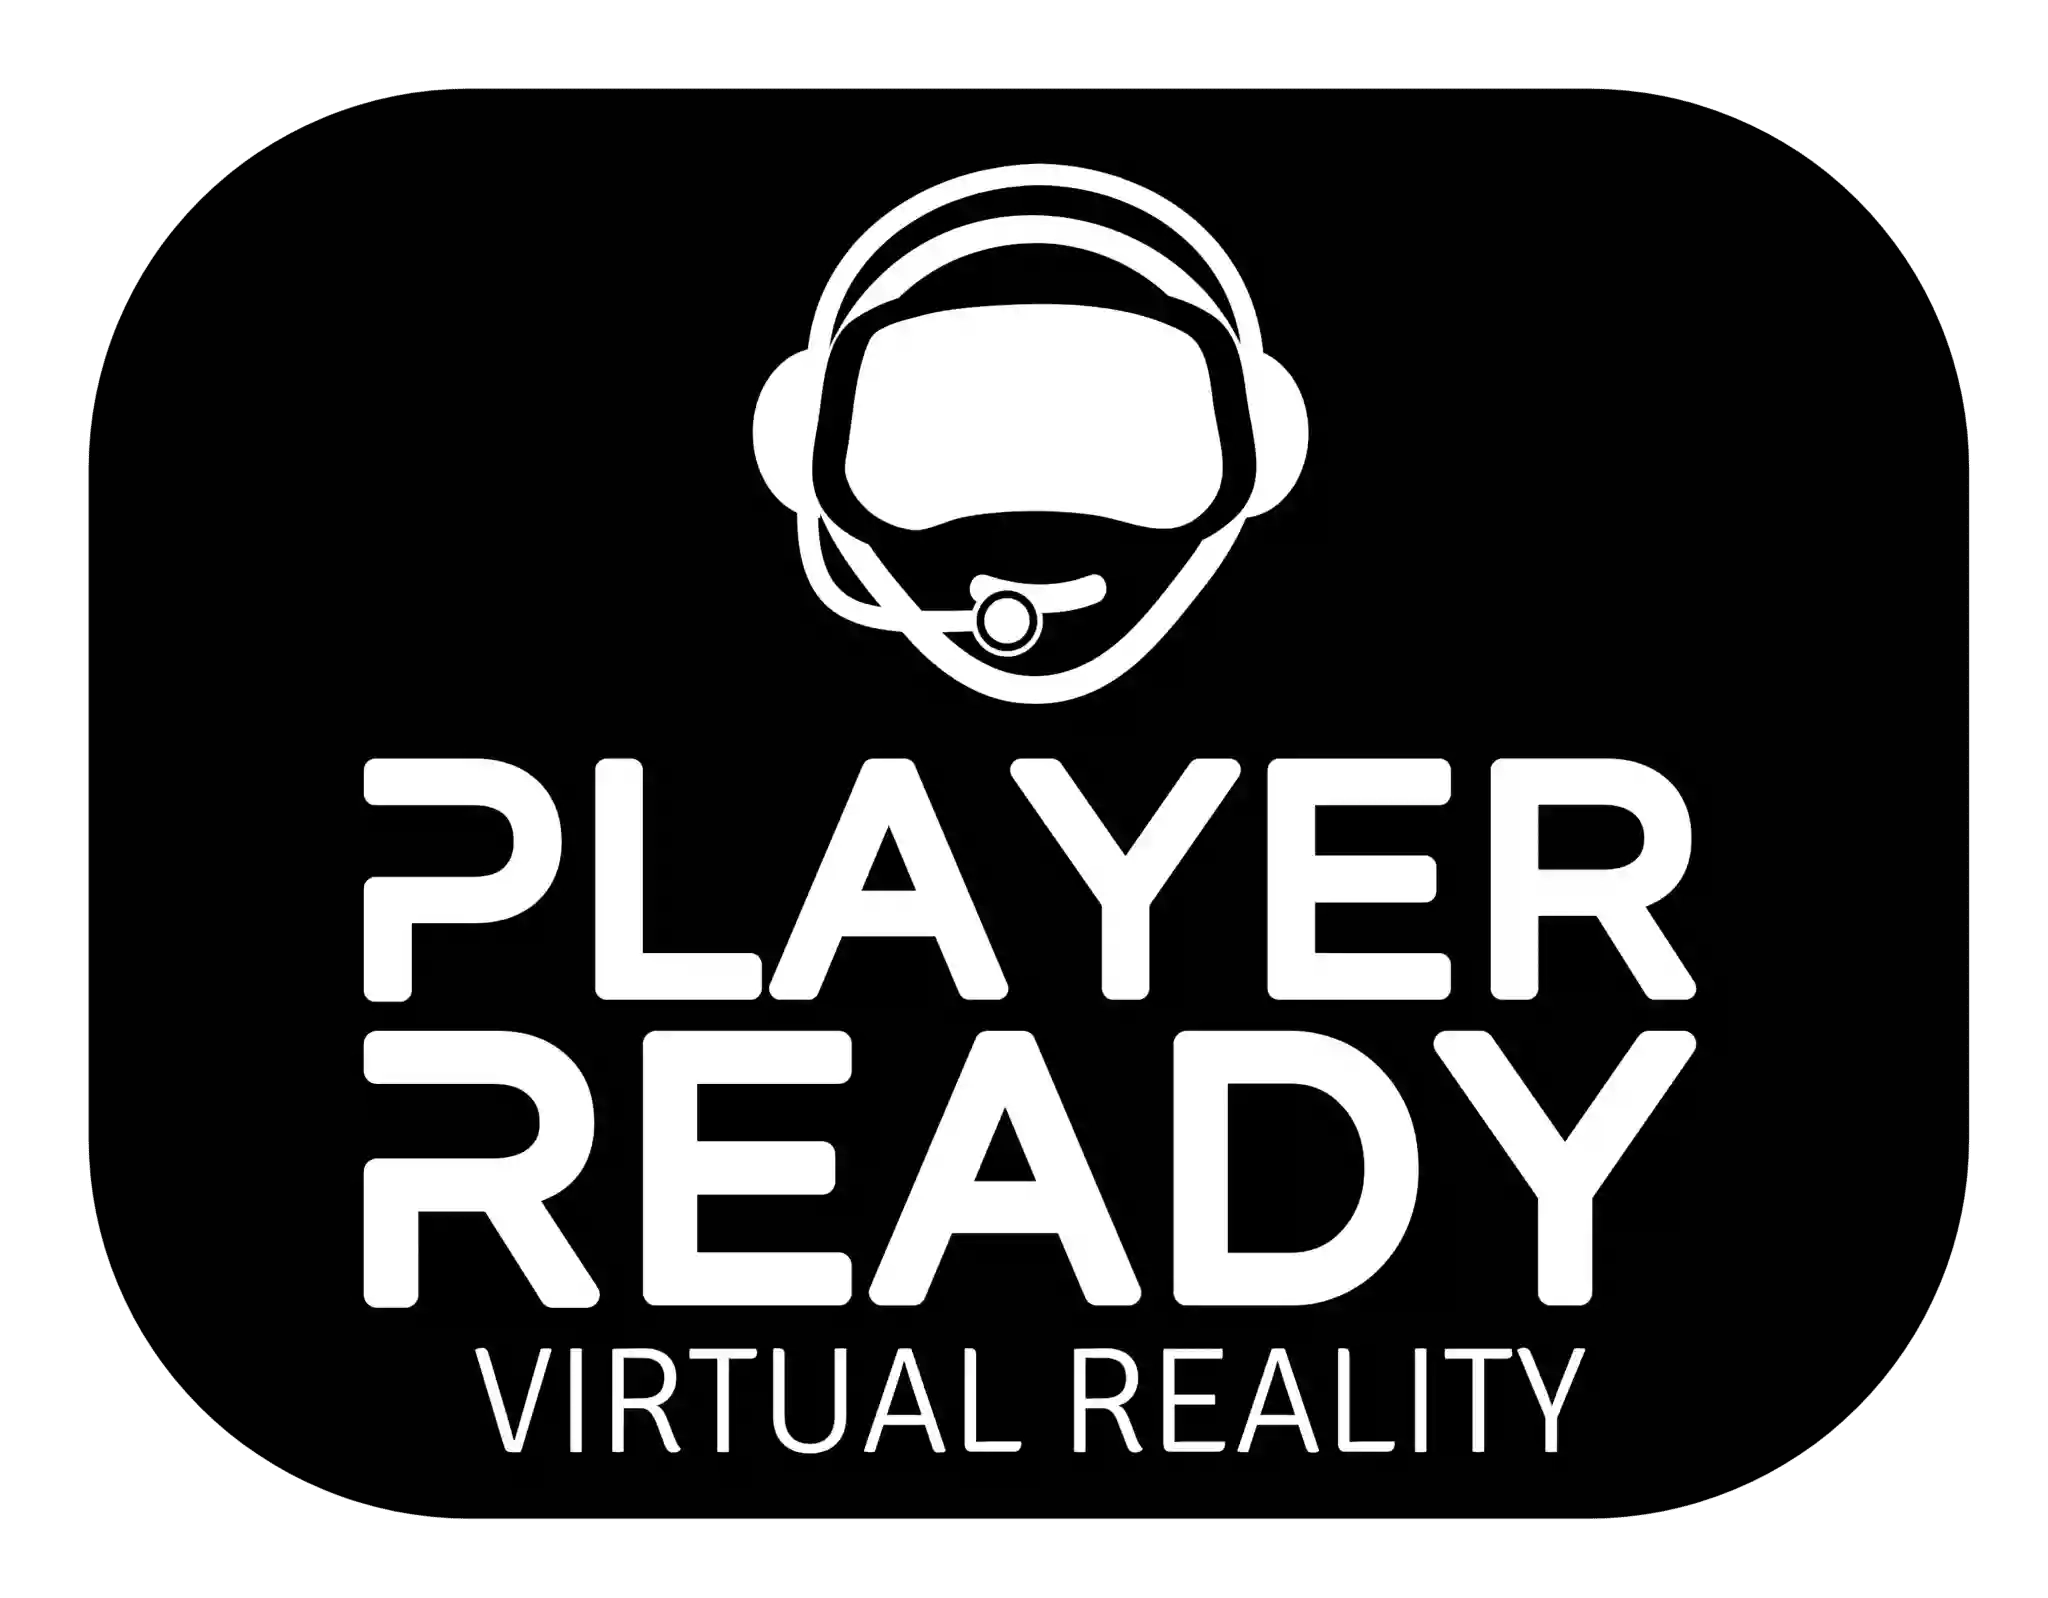 Plymouth Player Ready Virtual Reality (VR) Gaming, Escape Rooms, Sim Racing & Party Venue